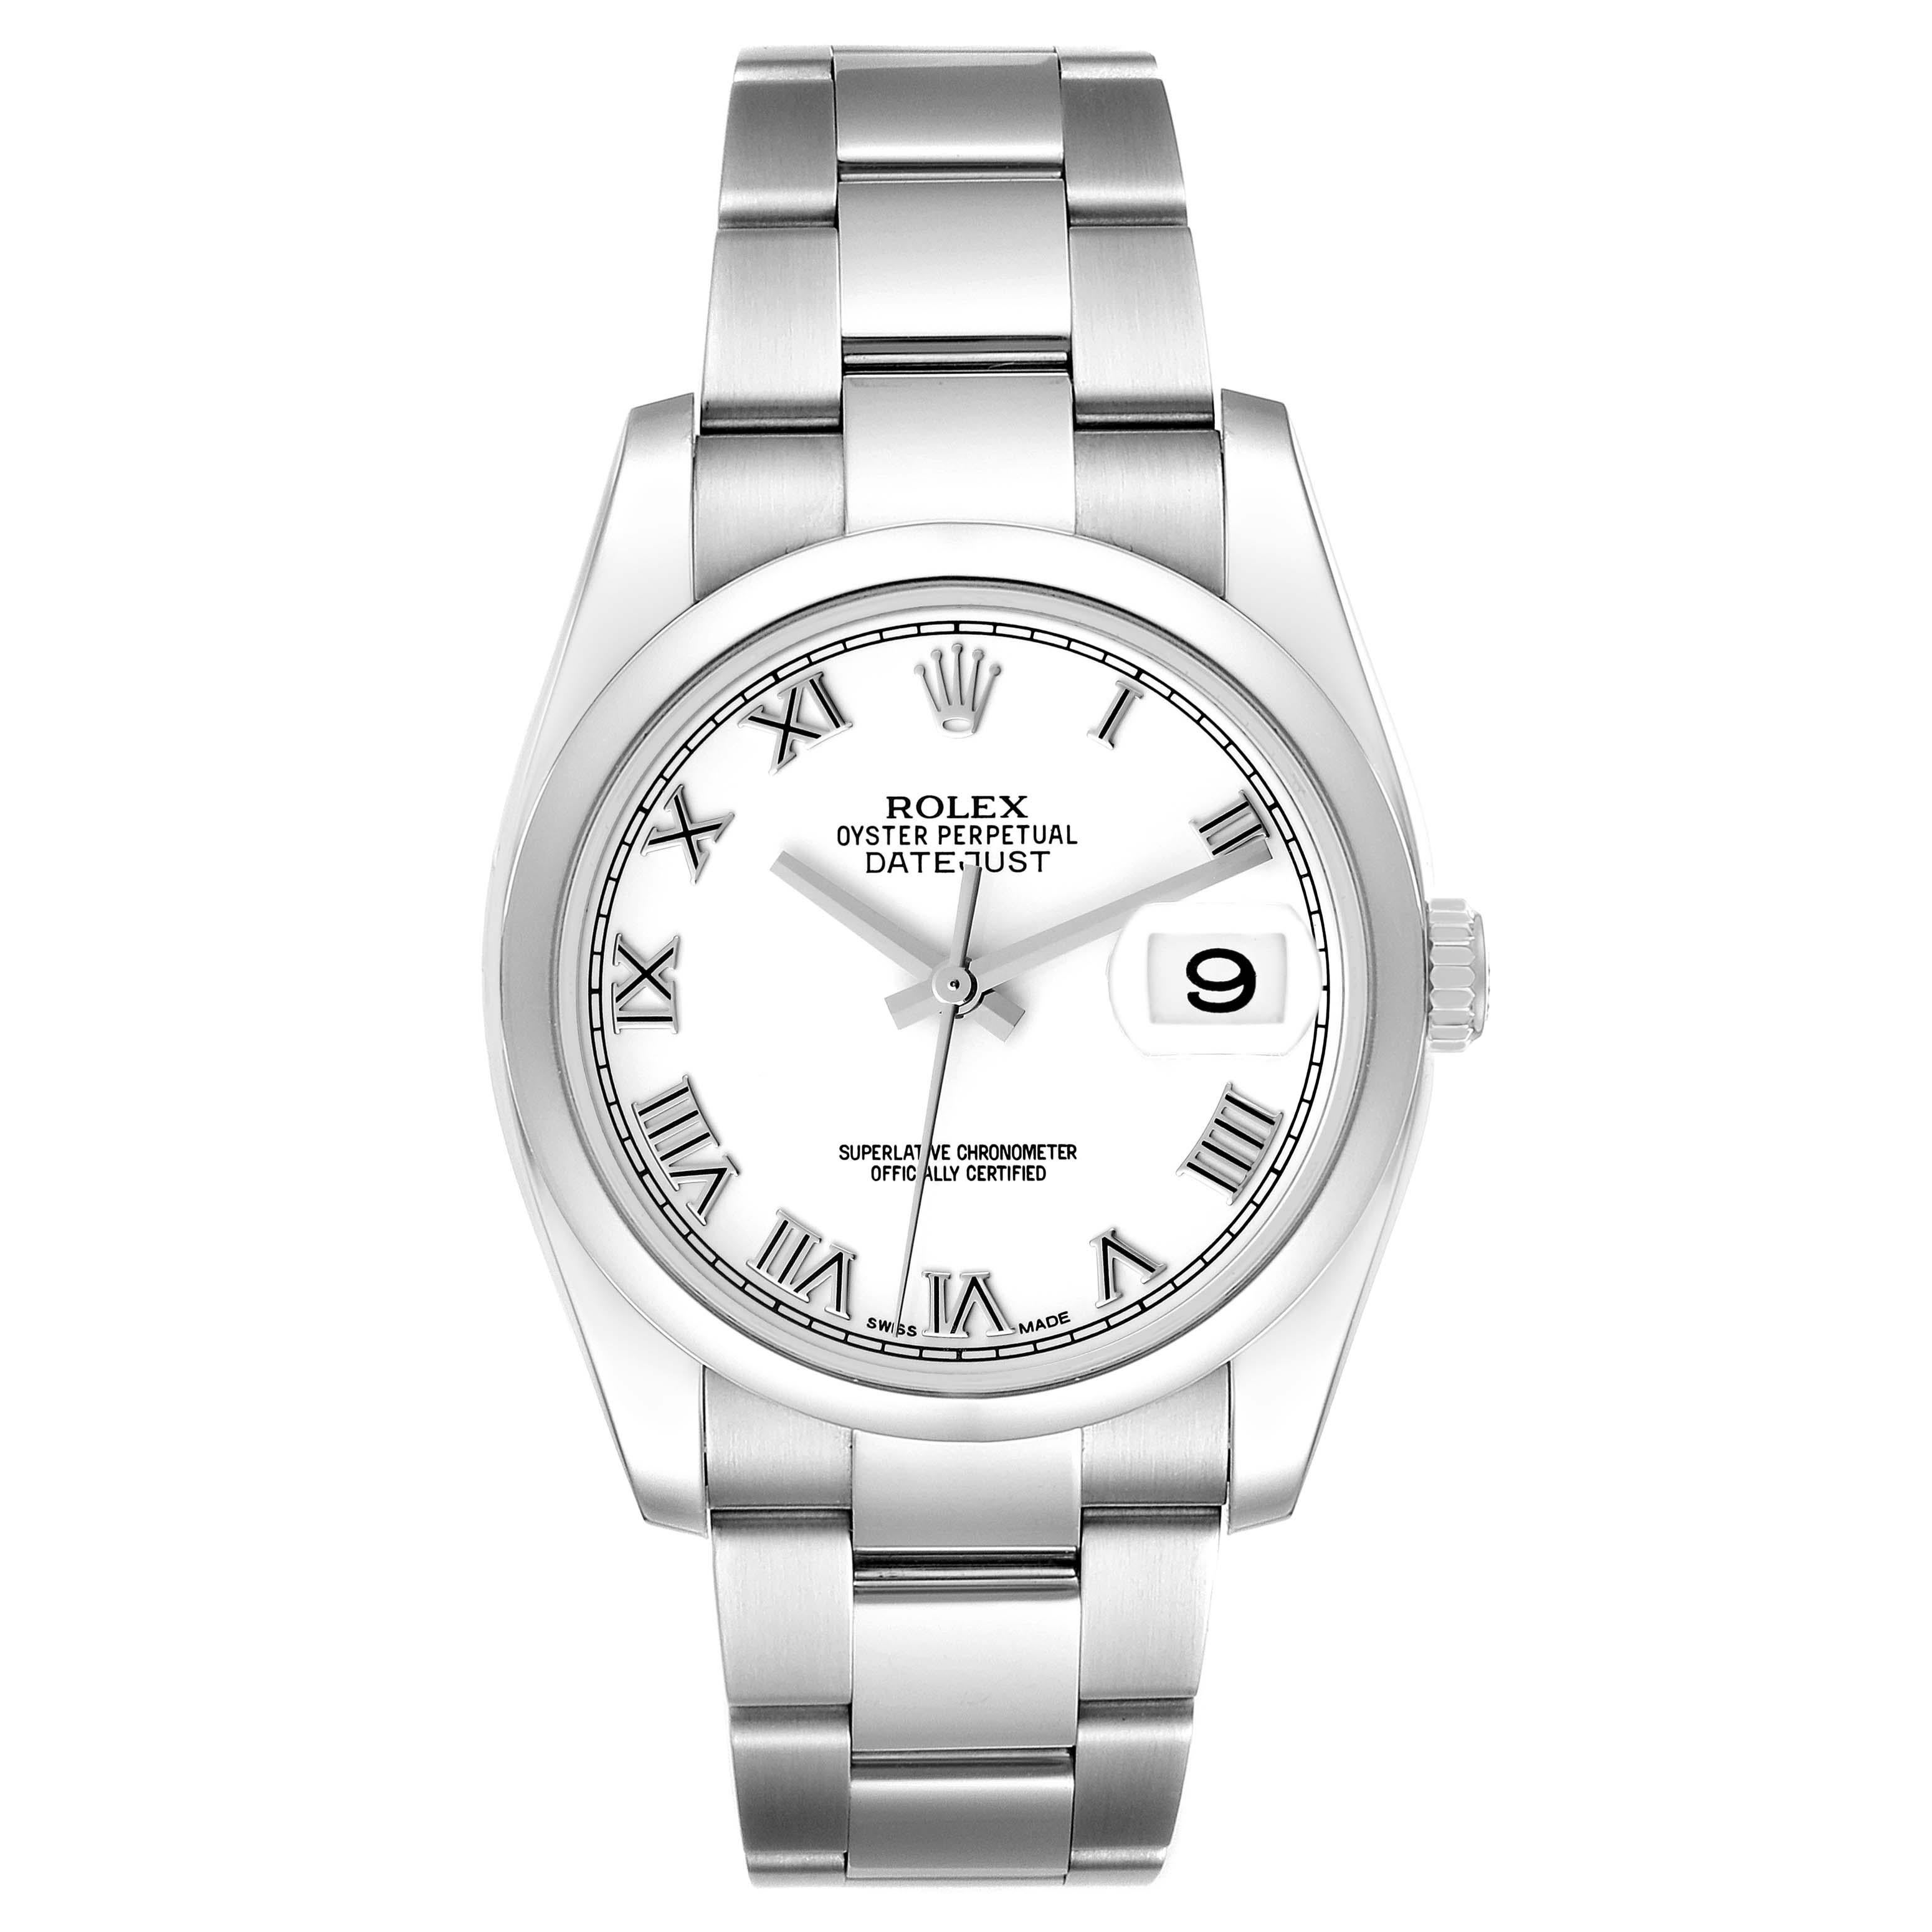 Rolex Datejust White Roman Dial Steel Mens Watch 116200 Box Card. Officially certified chronometer automatic self-winding movement with quickset date. Stainless steel case 36.0 mm in diameter. High polished lugs. Rolex logo on the crown. Stainless